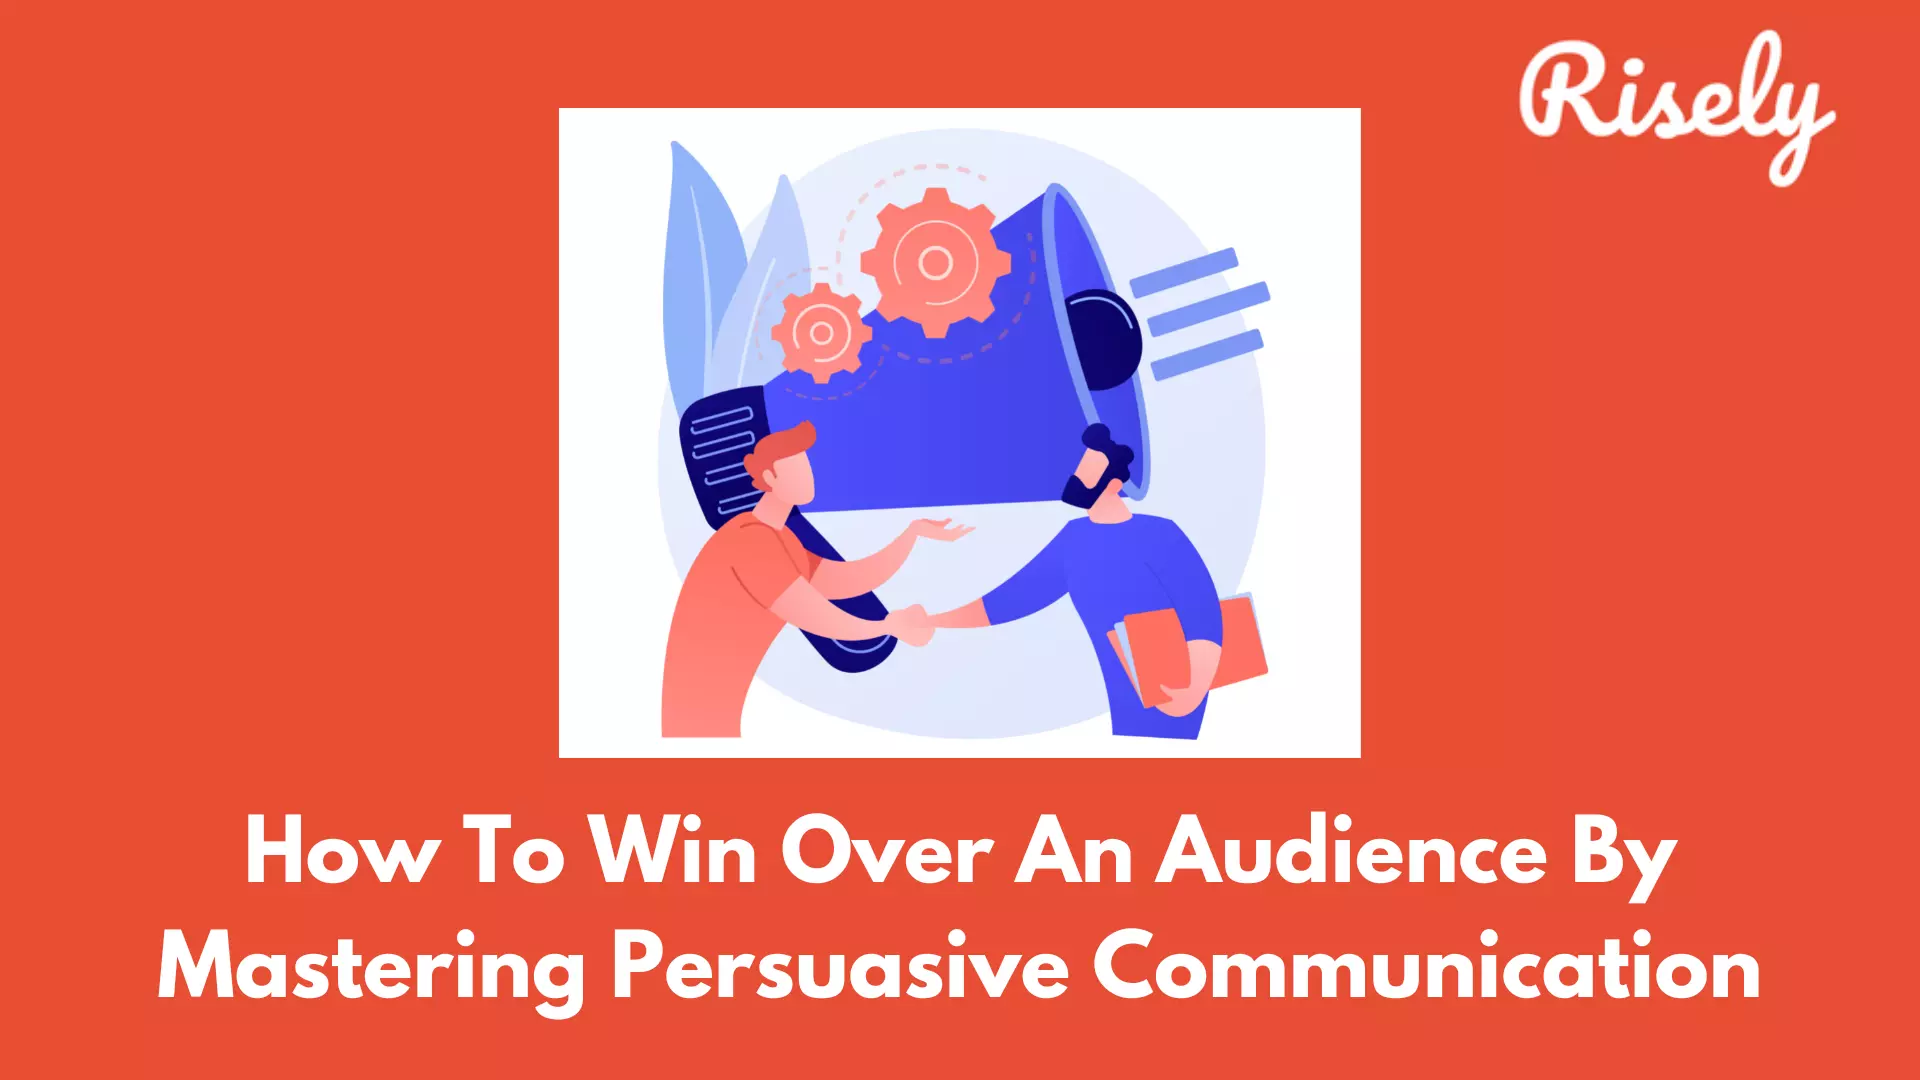 Mastering Persuasive Communication: How To Win Over An Audience